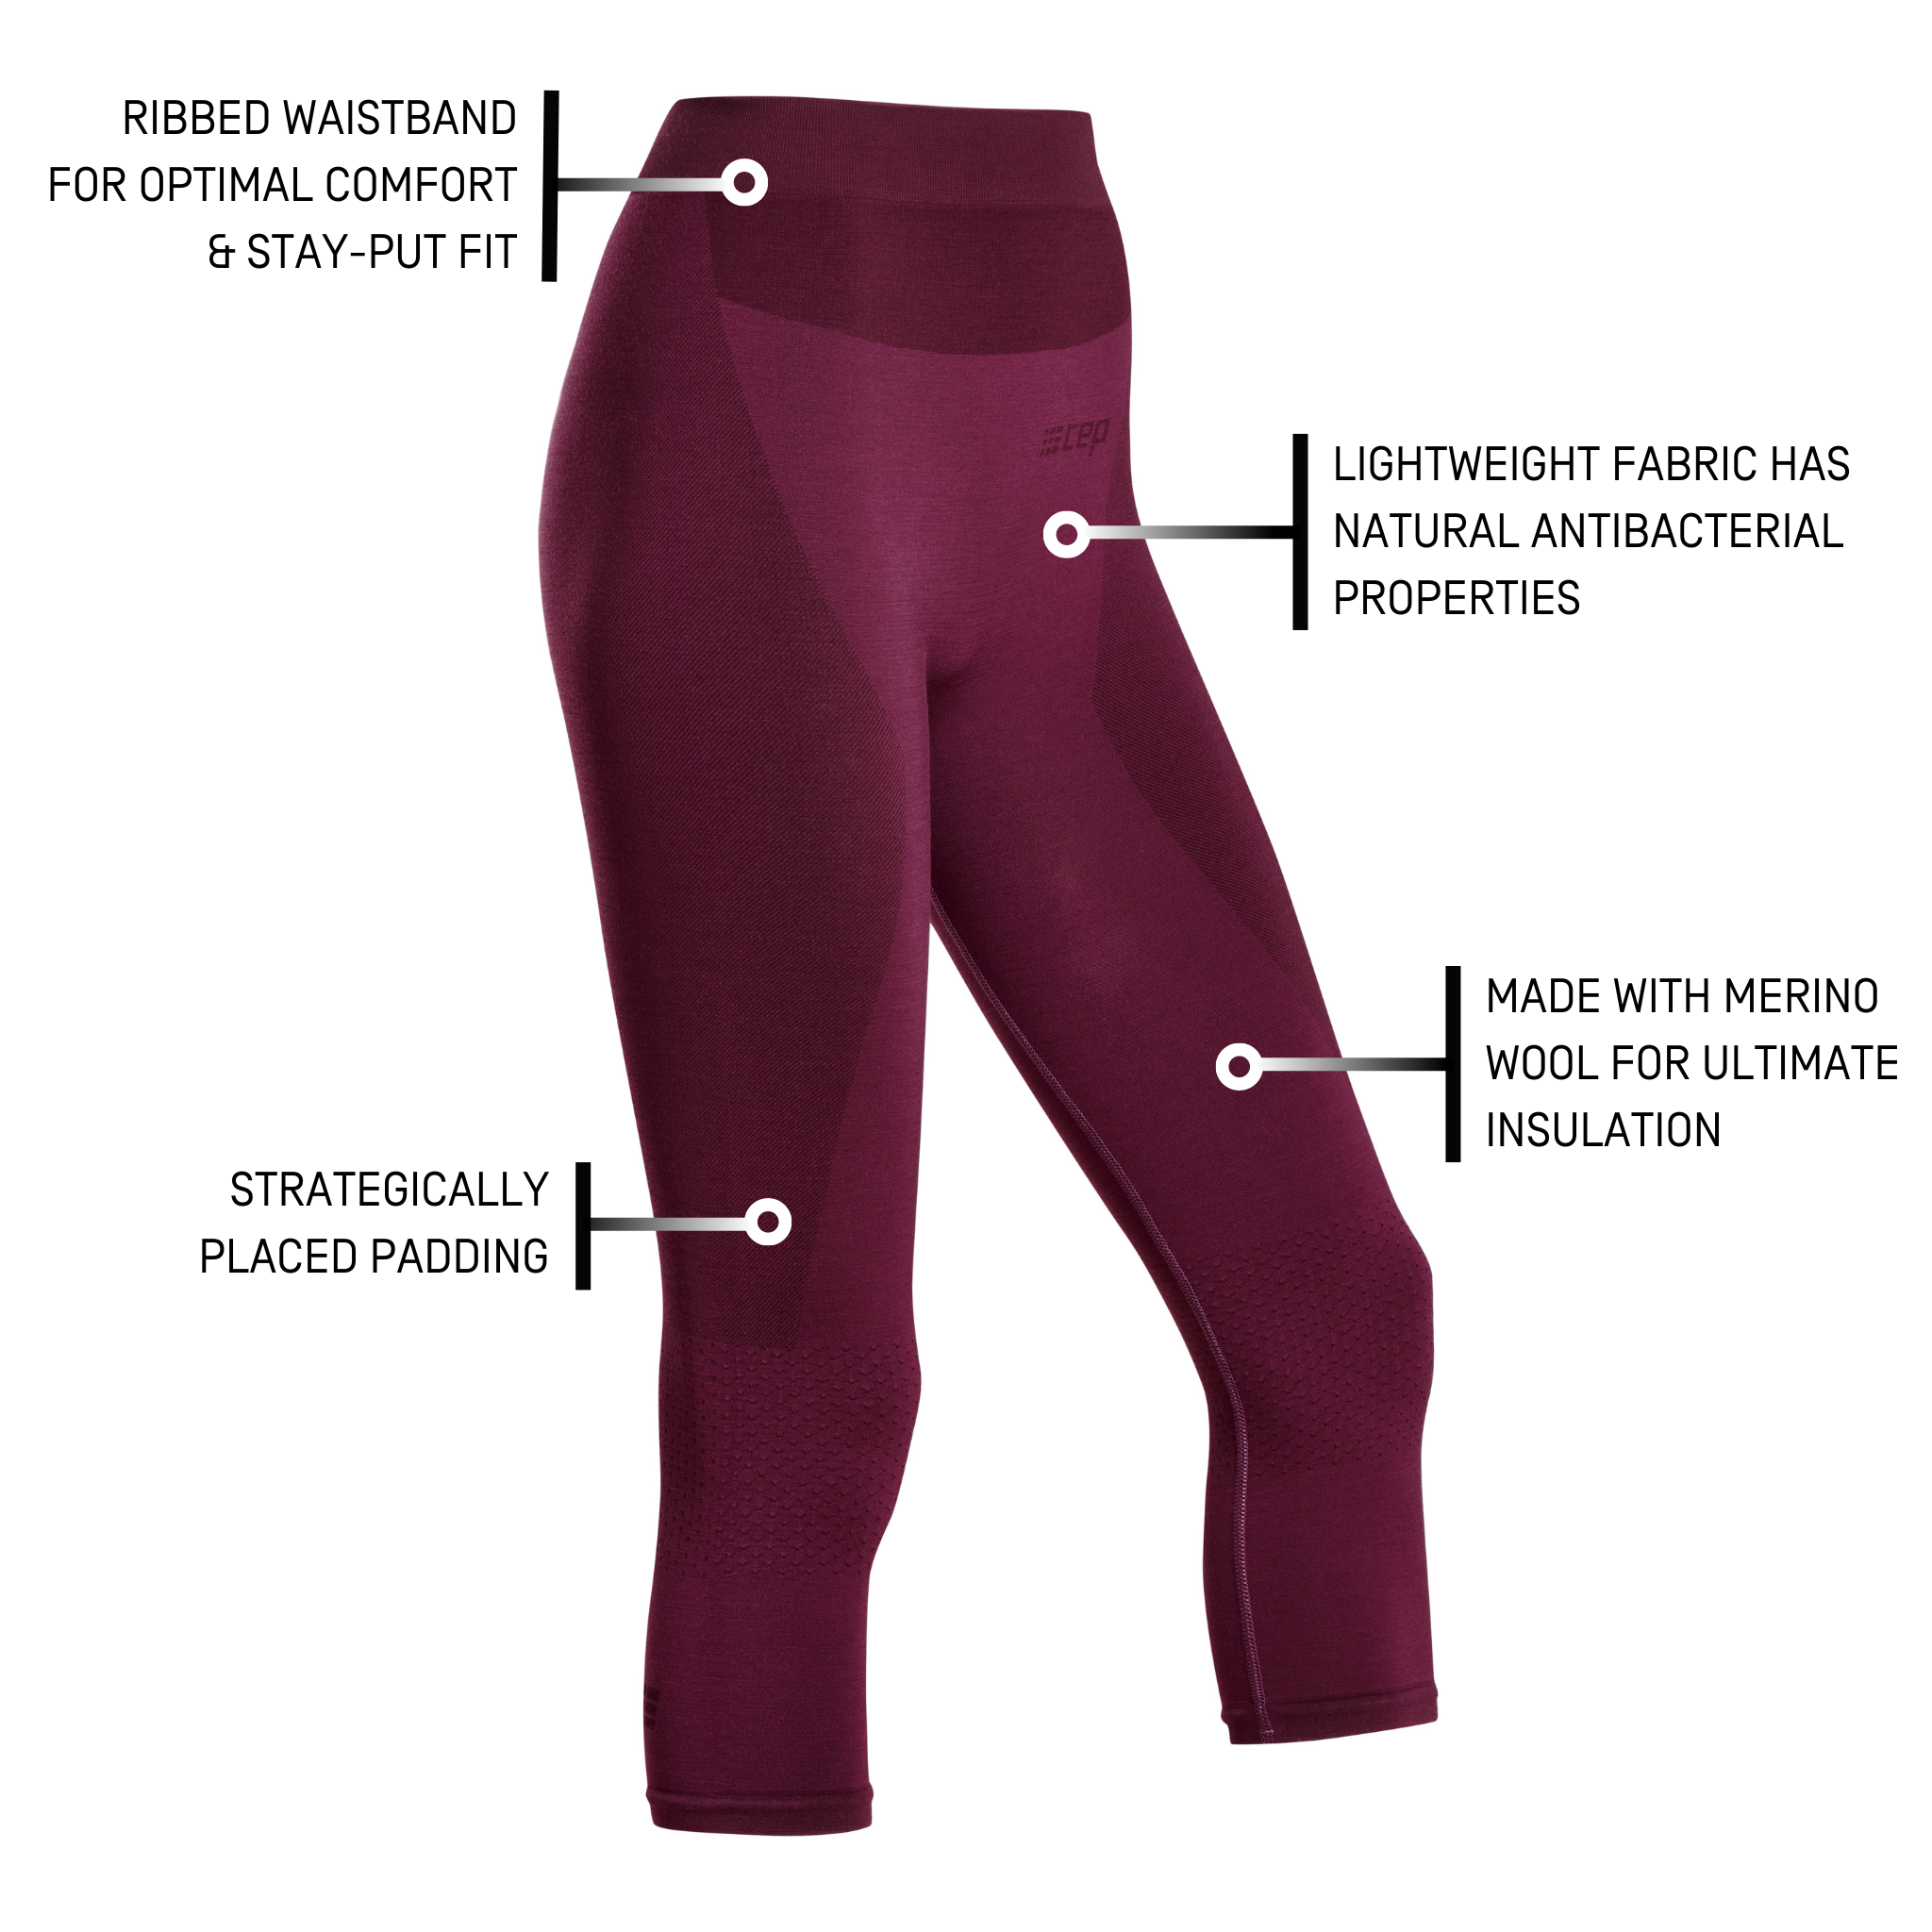 Clearance Under $5 Clothing,Workout Pocket Leggings Fitness Sports Running  Yoga Athletic Pants Pink Xl - Walmart.com